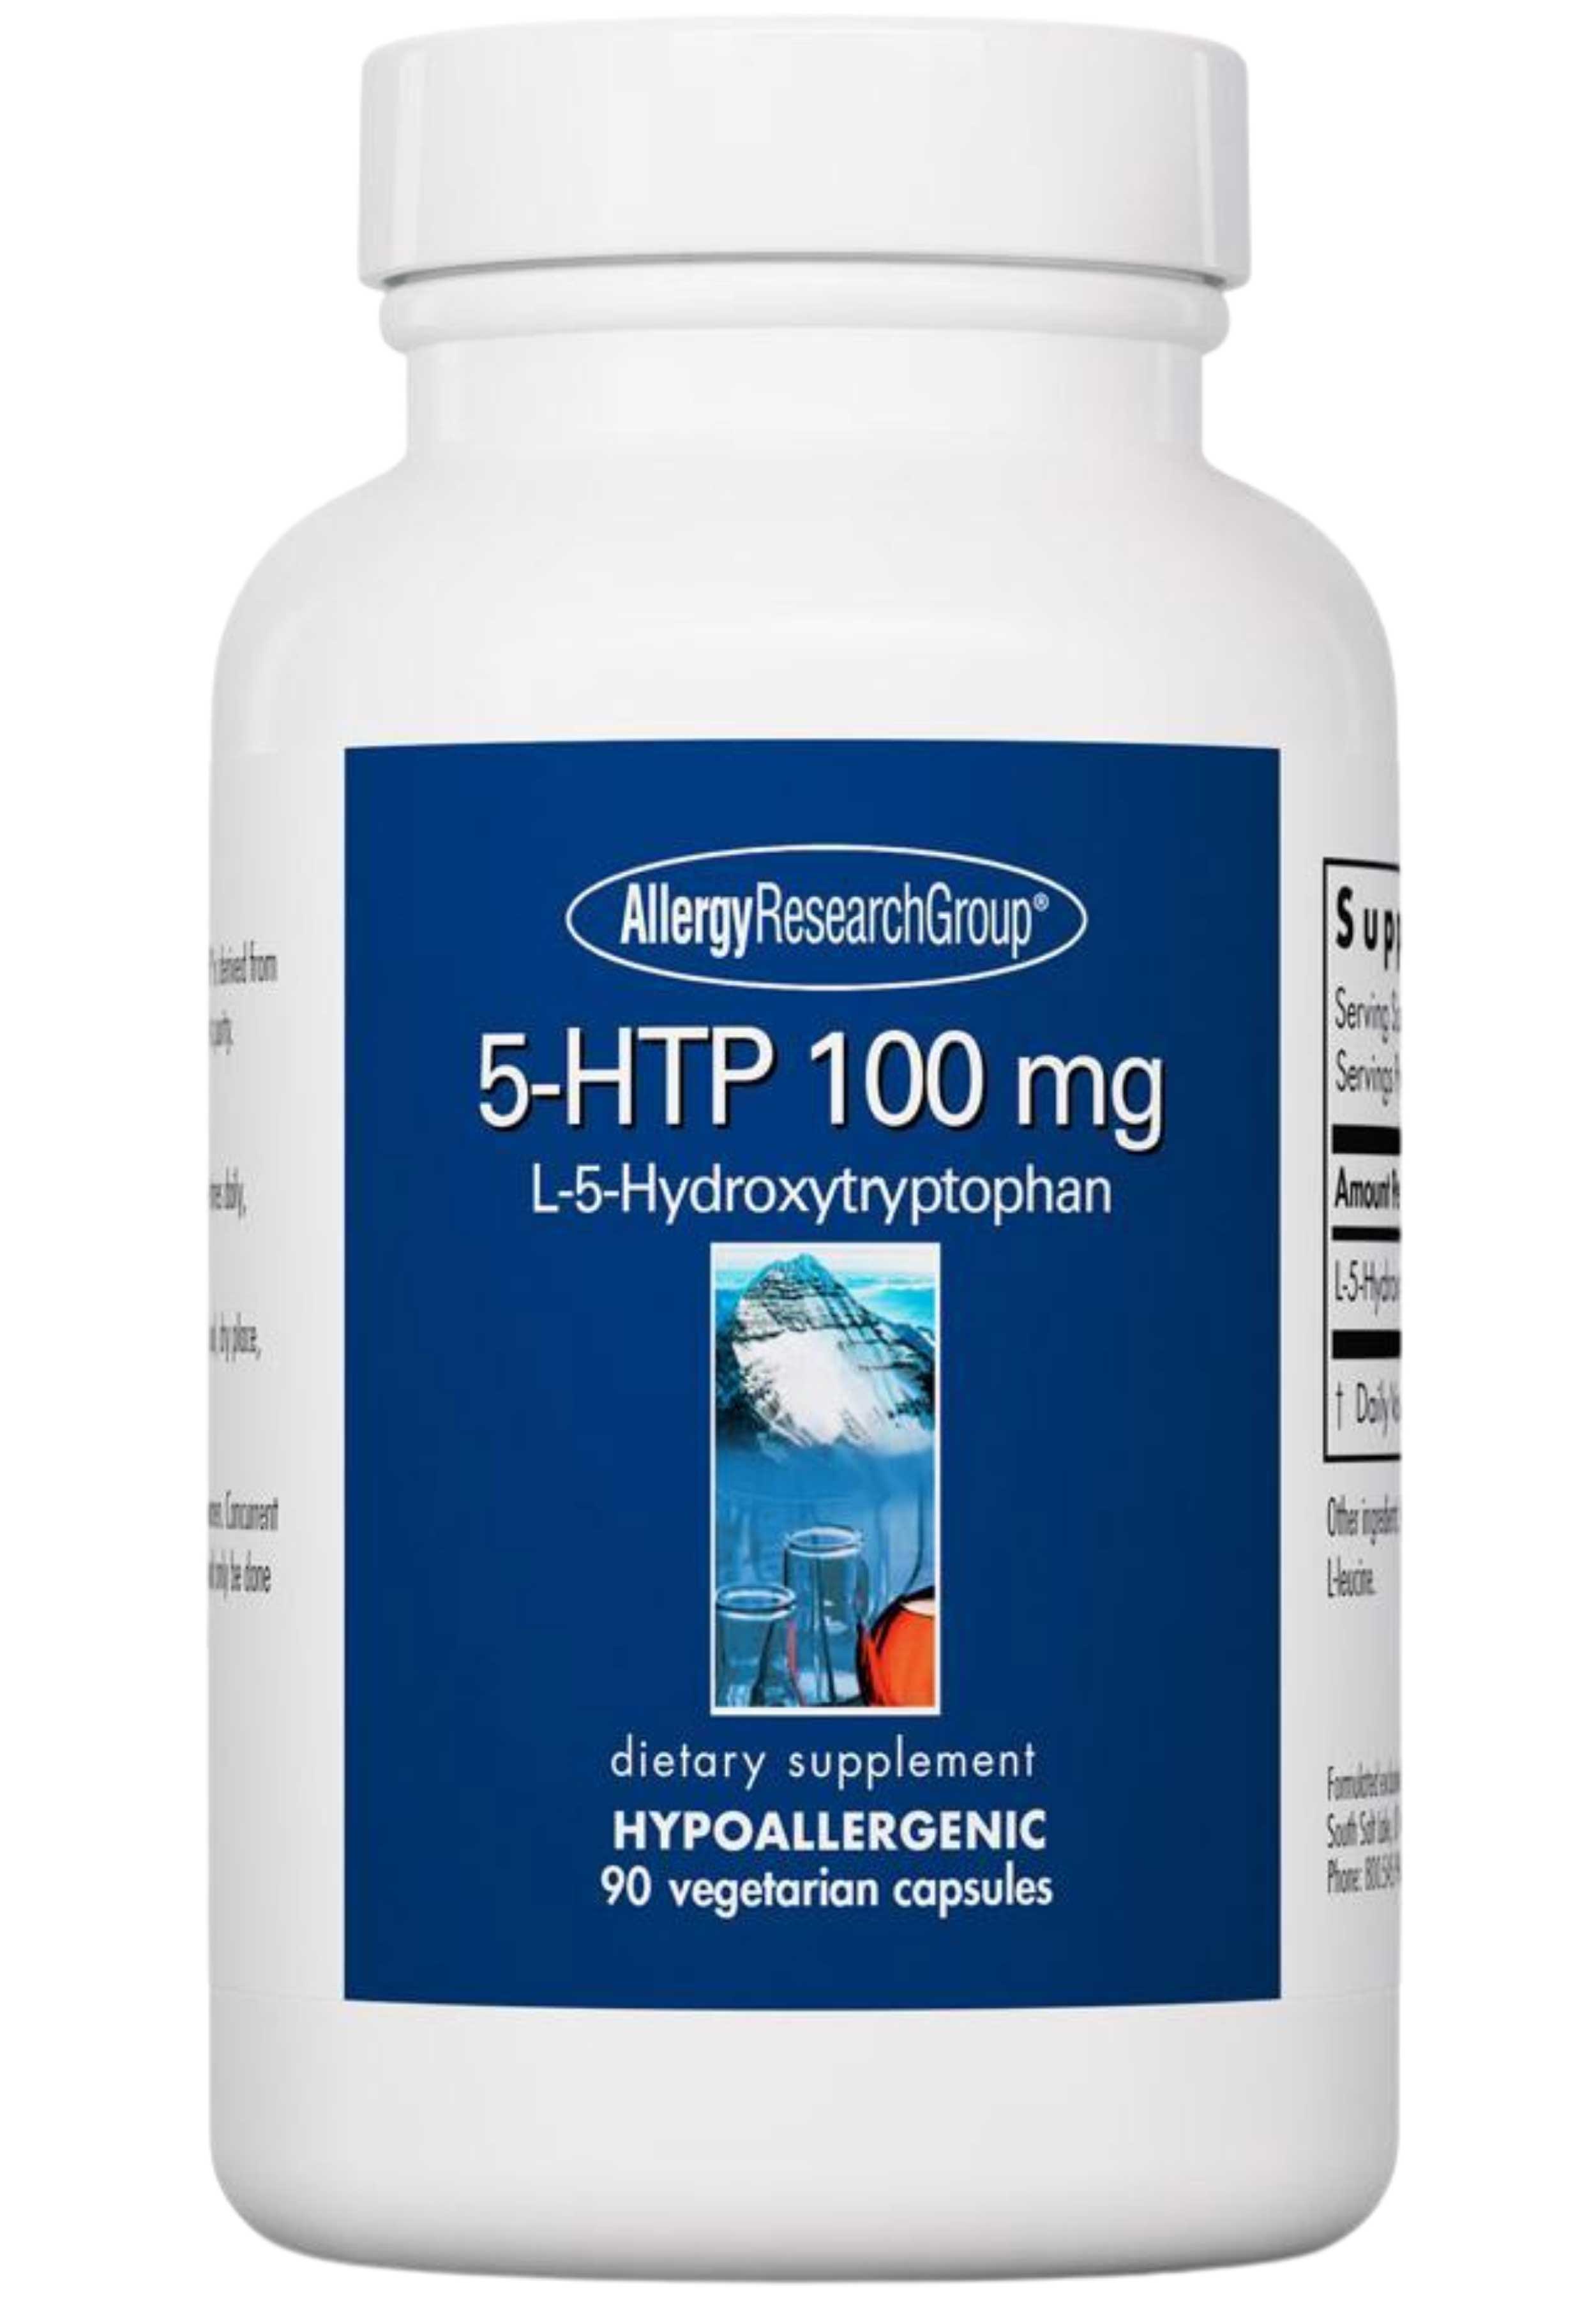 Allergy Research Group 5-HTP 100 mg